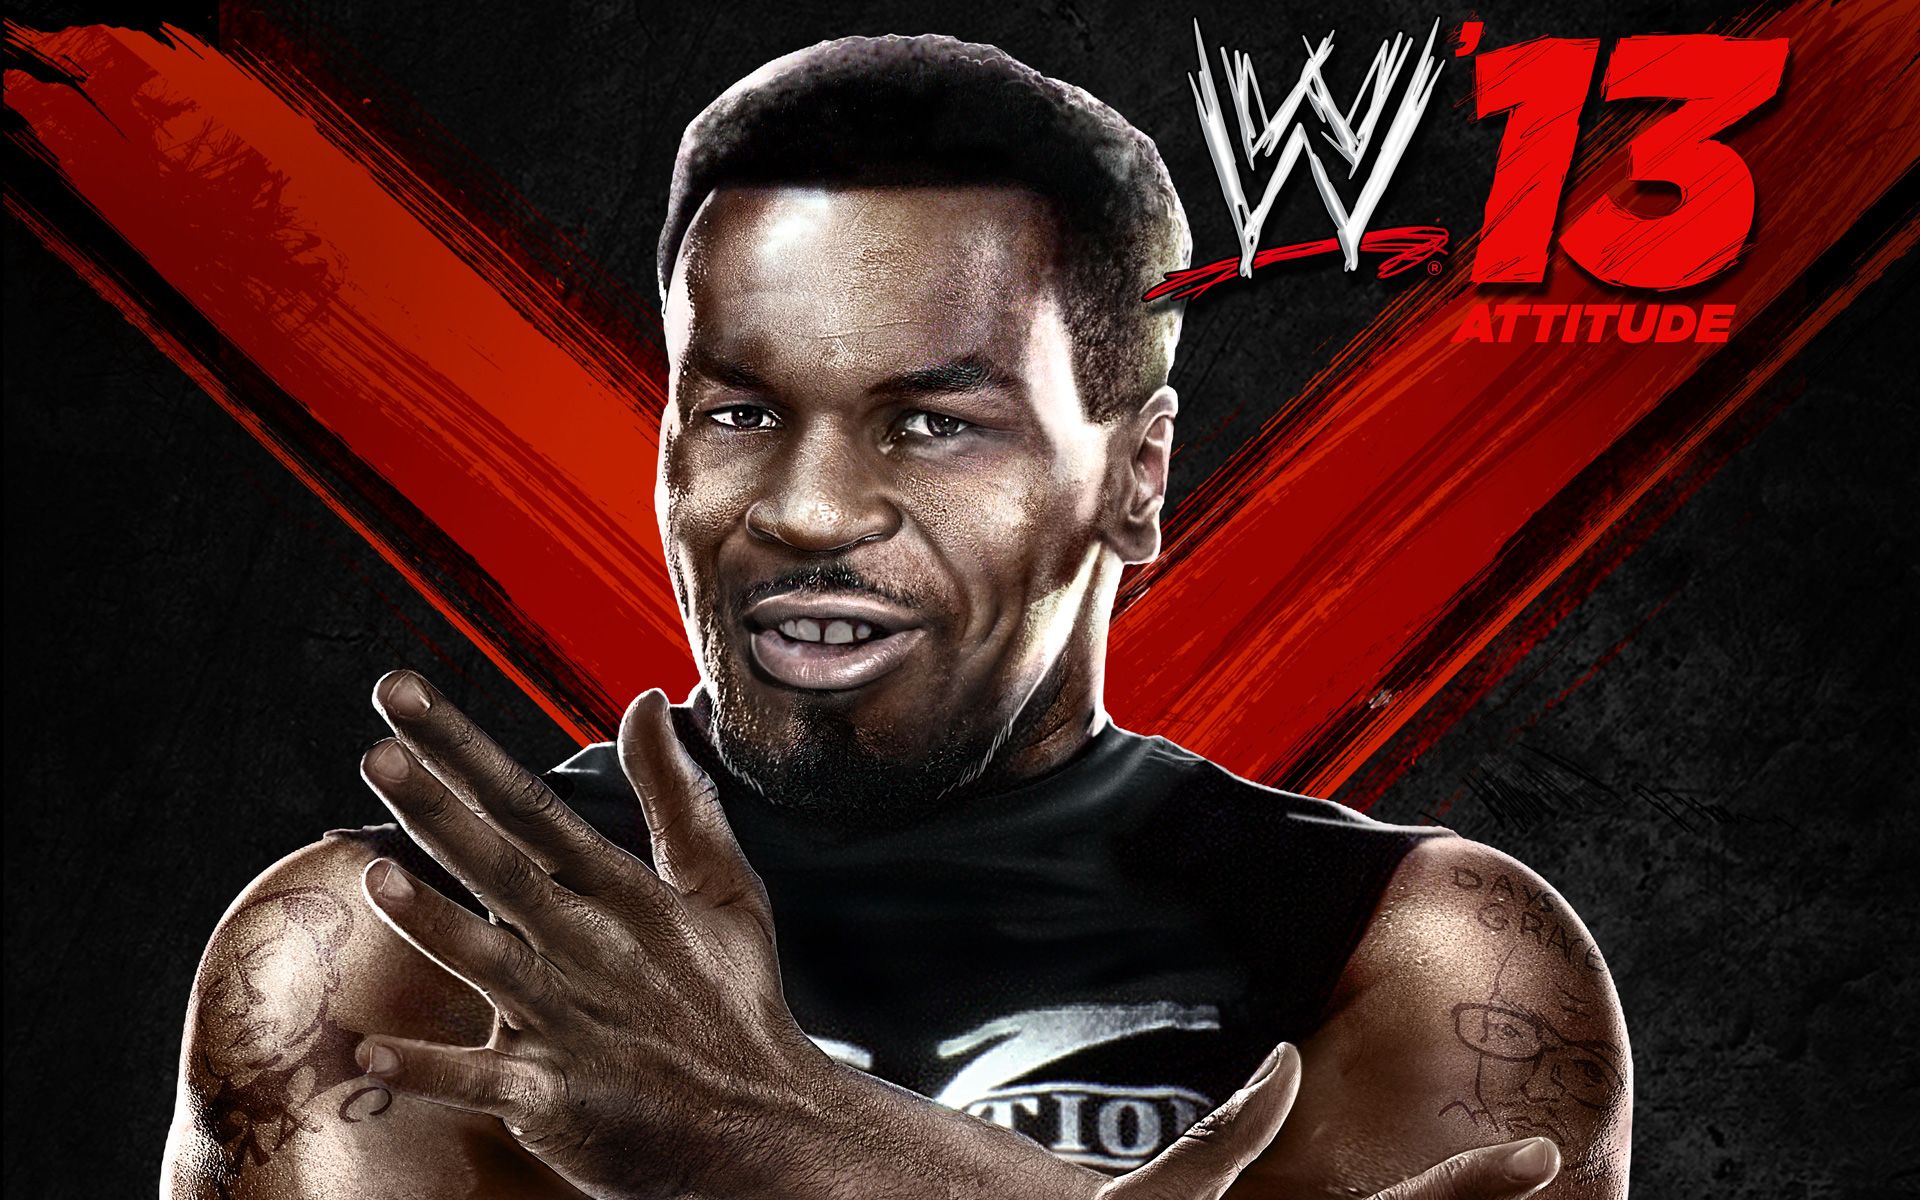 WWE 12 freewallpapers in high resolutions - Wrestling game